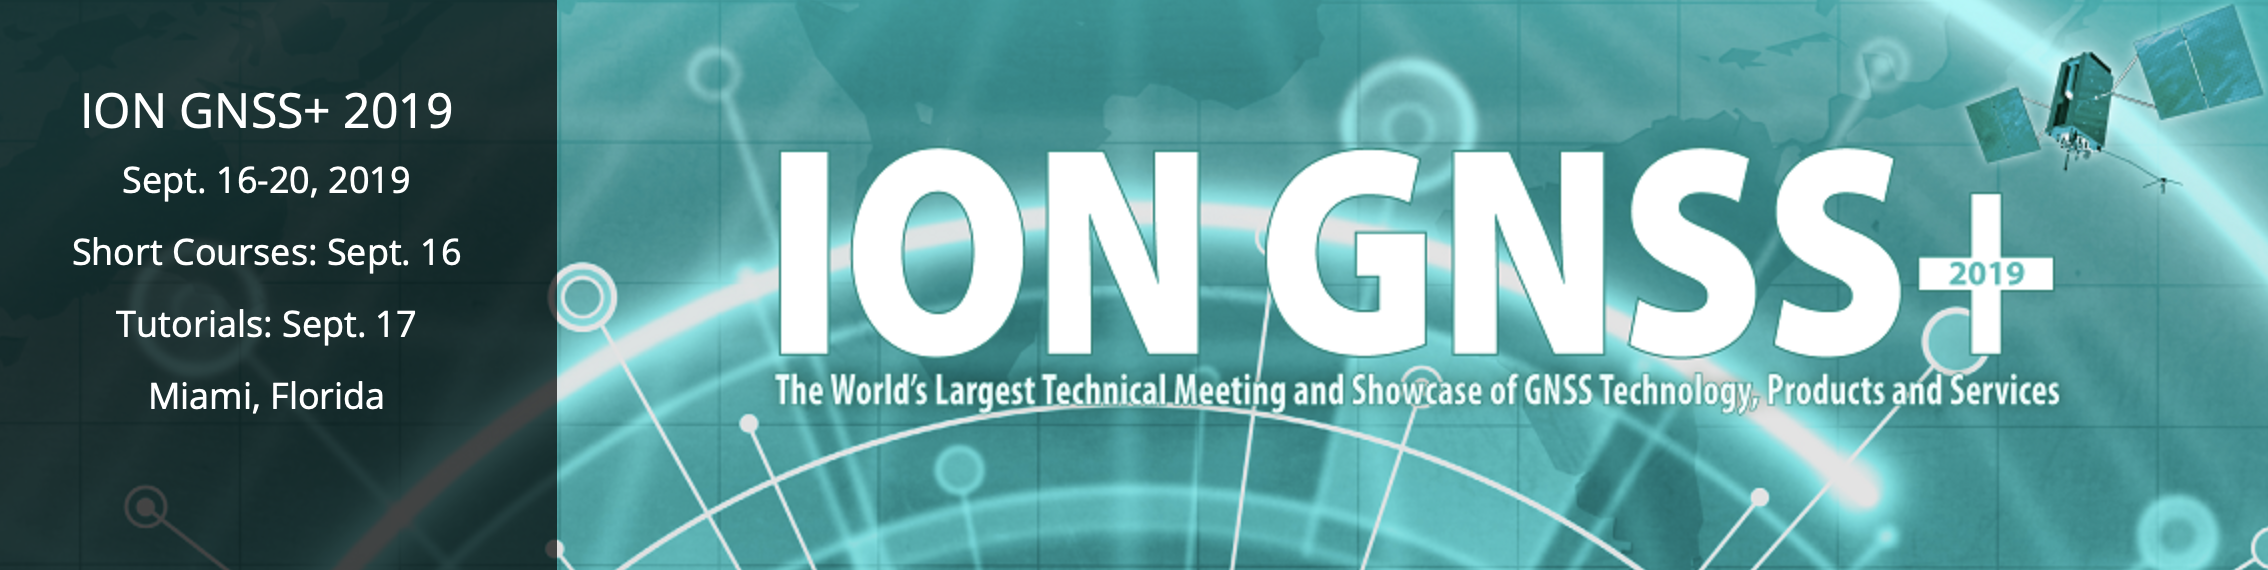 ION GNSS+ 2019 Calling for Abstracts